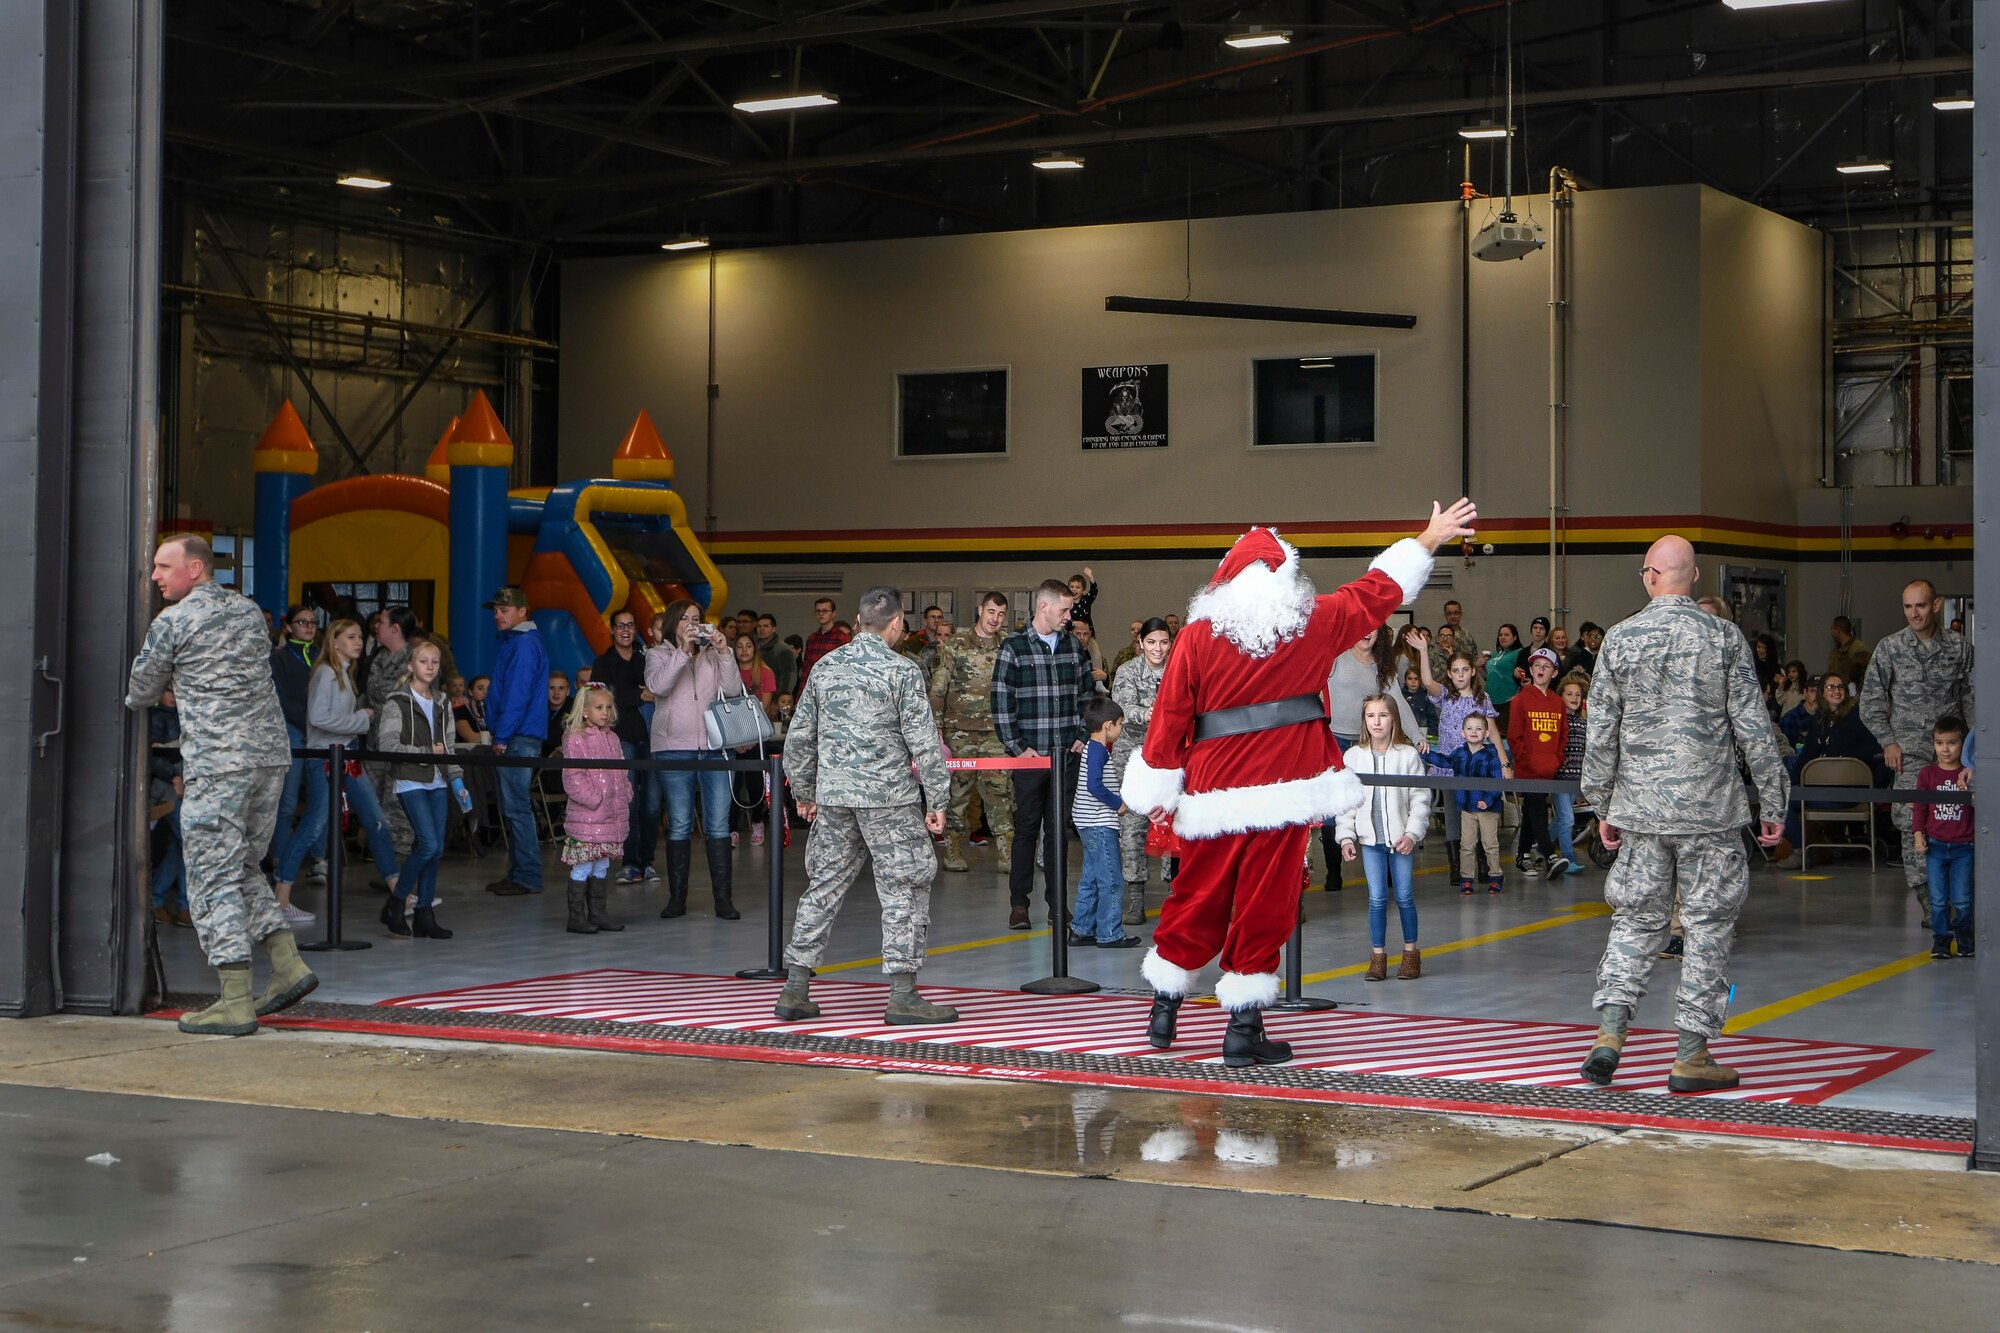 Santa waves to members of the 419th Fighter Wing and their families after “arriving" in an F-35 Lightning II